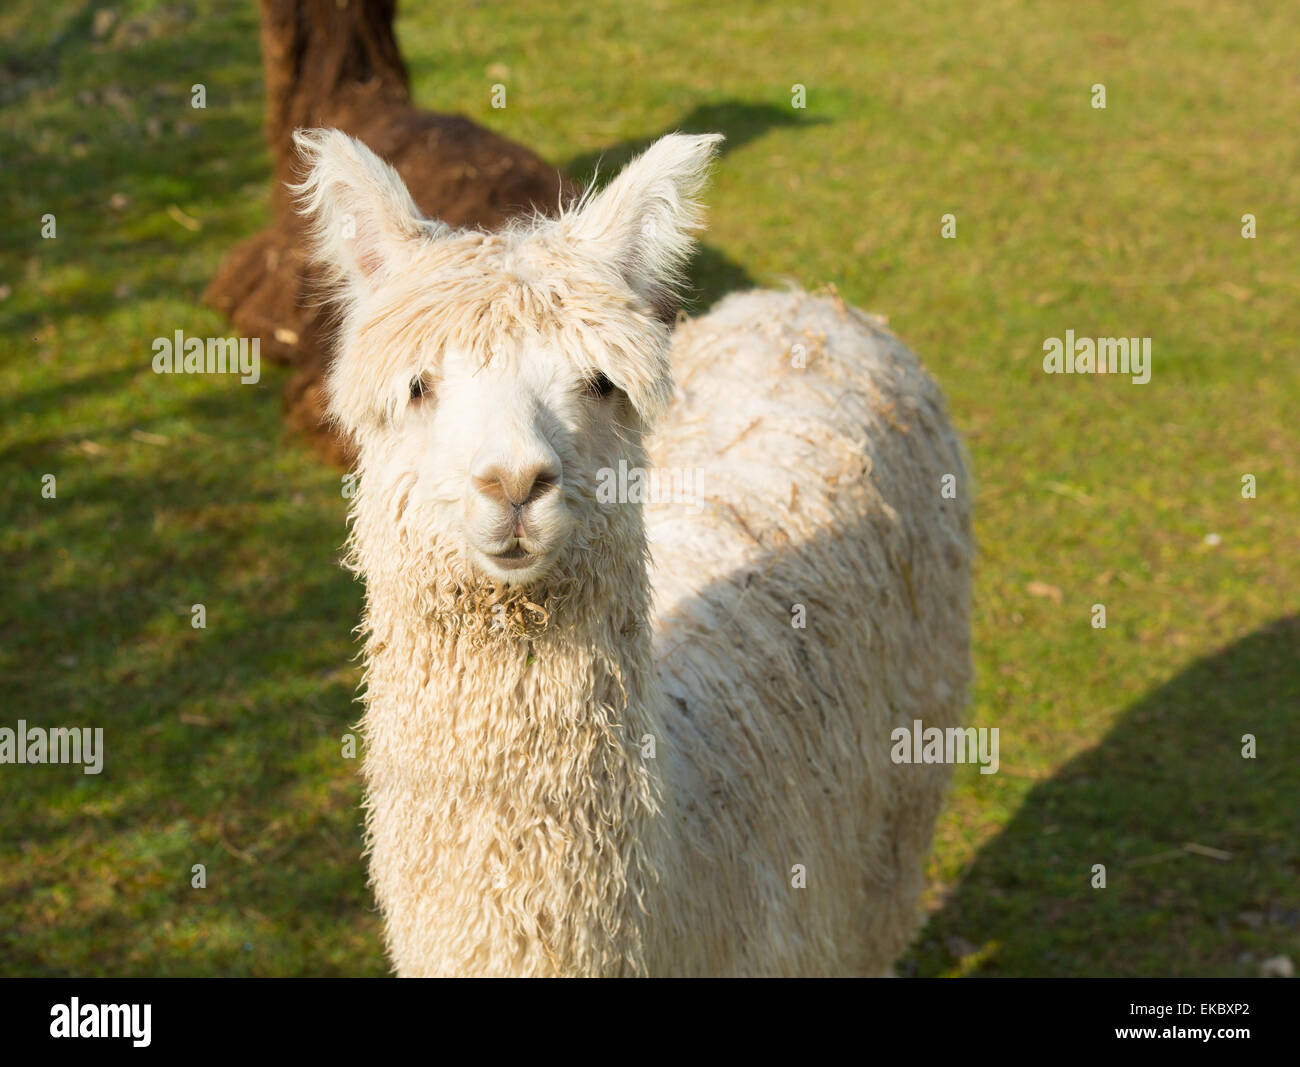 White Alpaca South American camelid resembles small llama with coat used for wool and cute smile Stock Photo